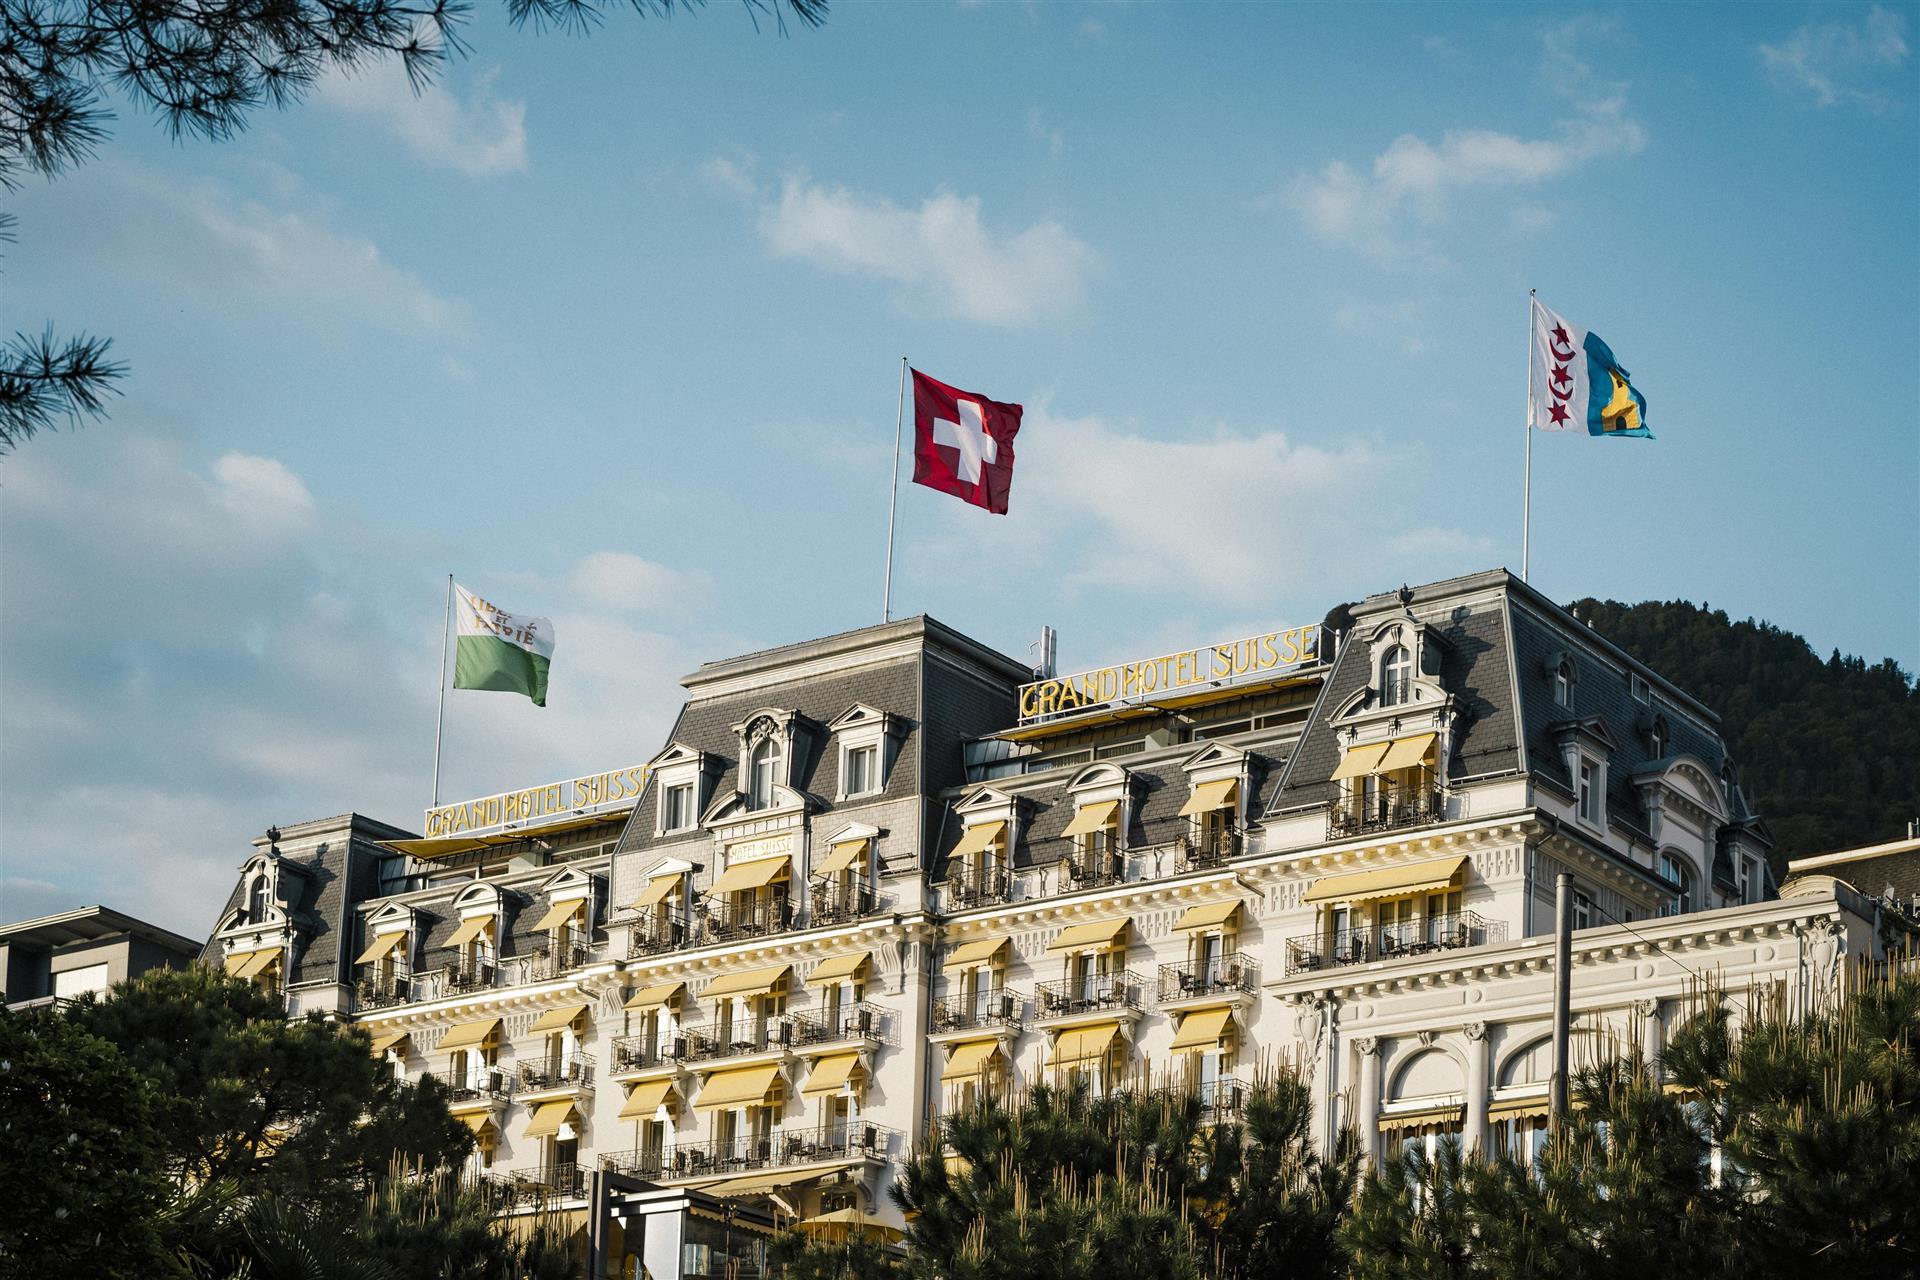 Grand Hotel Suisse Majestic, Autograph Collection in Montreux, CH